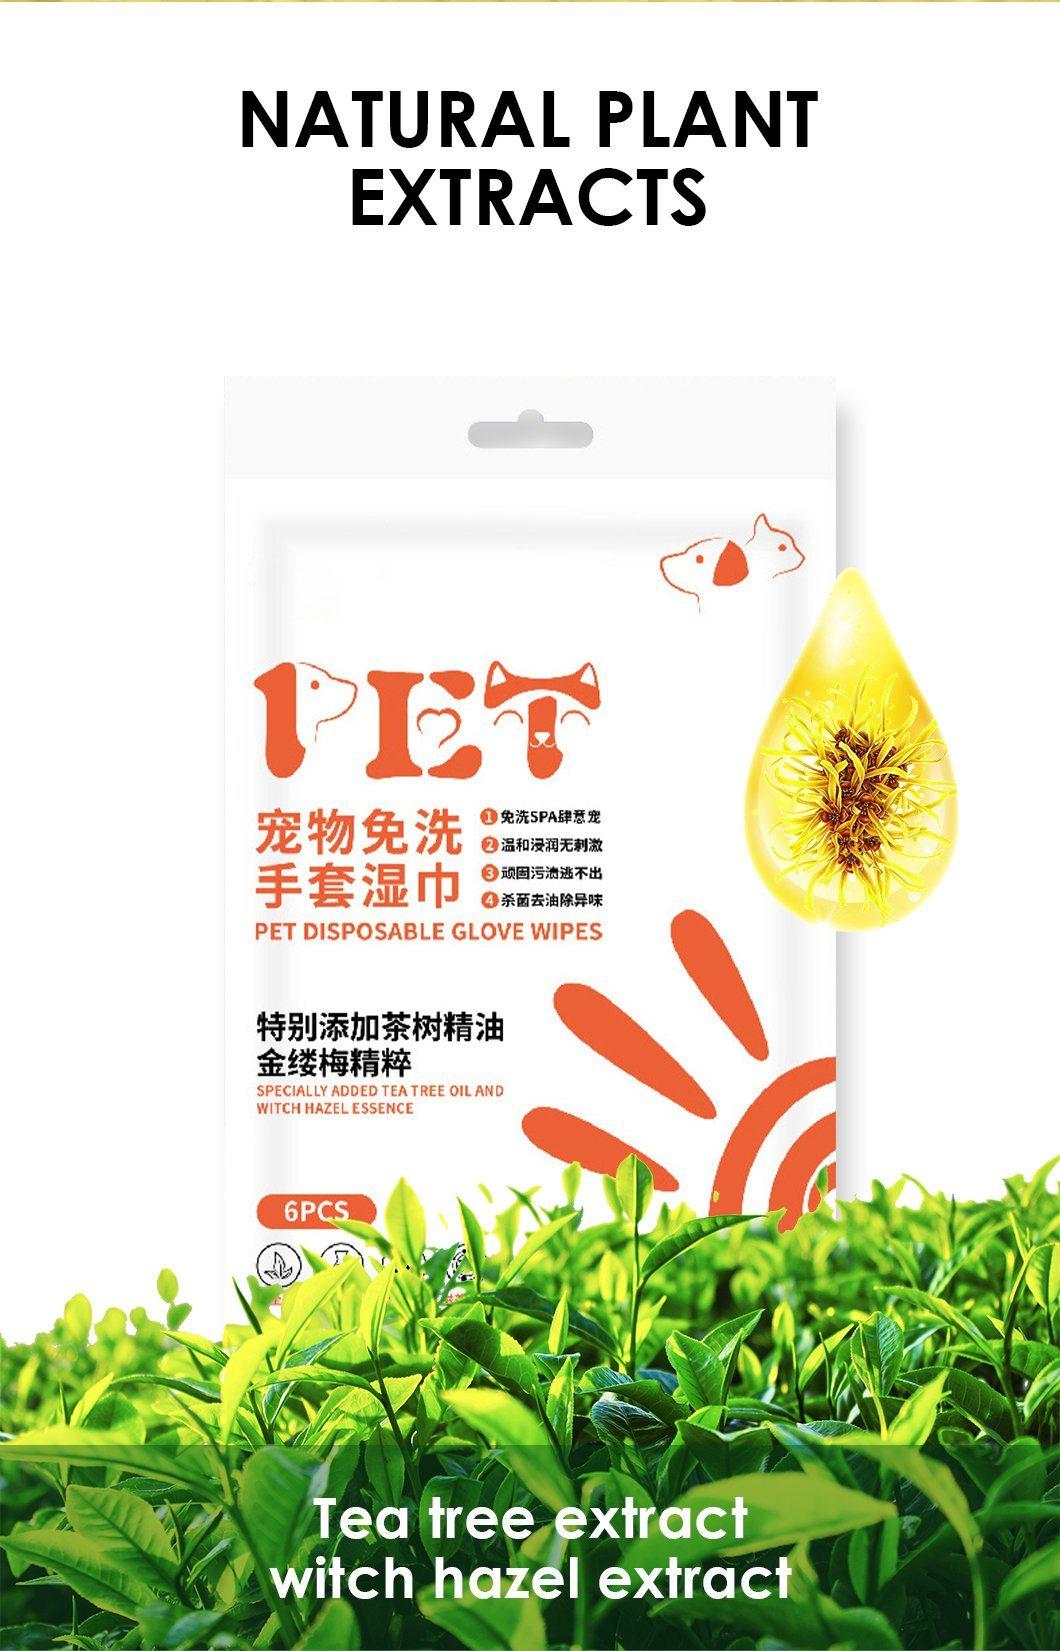 Pet Cleaning Glove, 6 Pieces Per Bag, Customize Logo/Size/Packaging, Good for New Enterprise, Really Excellent Price